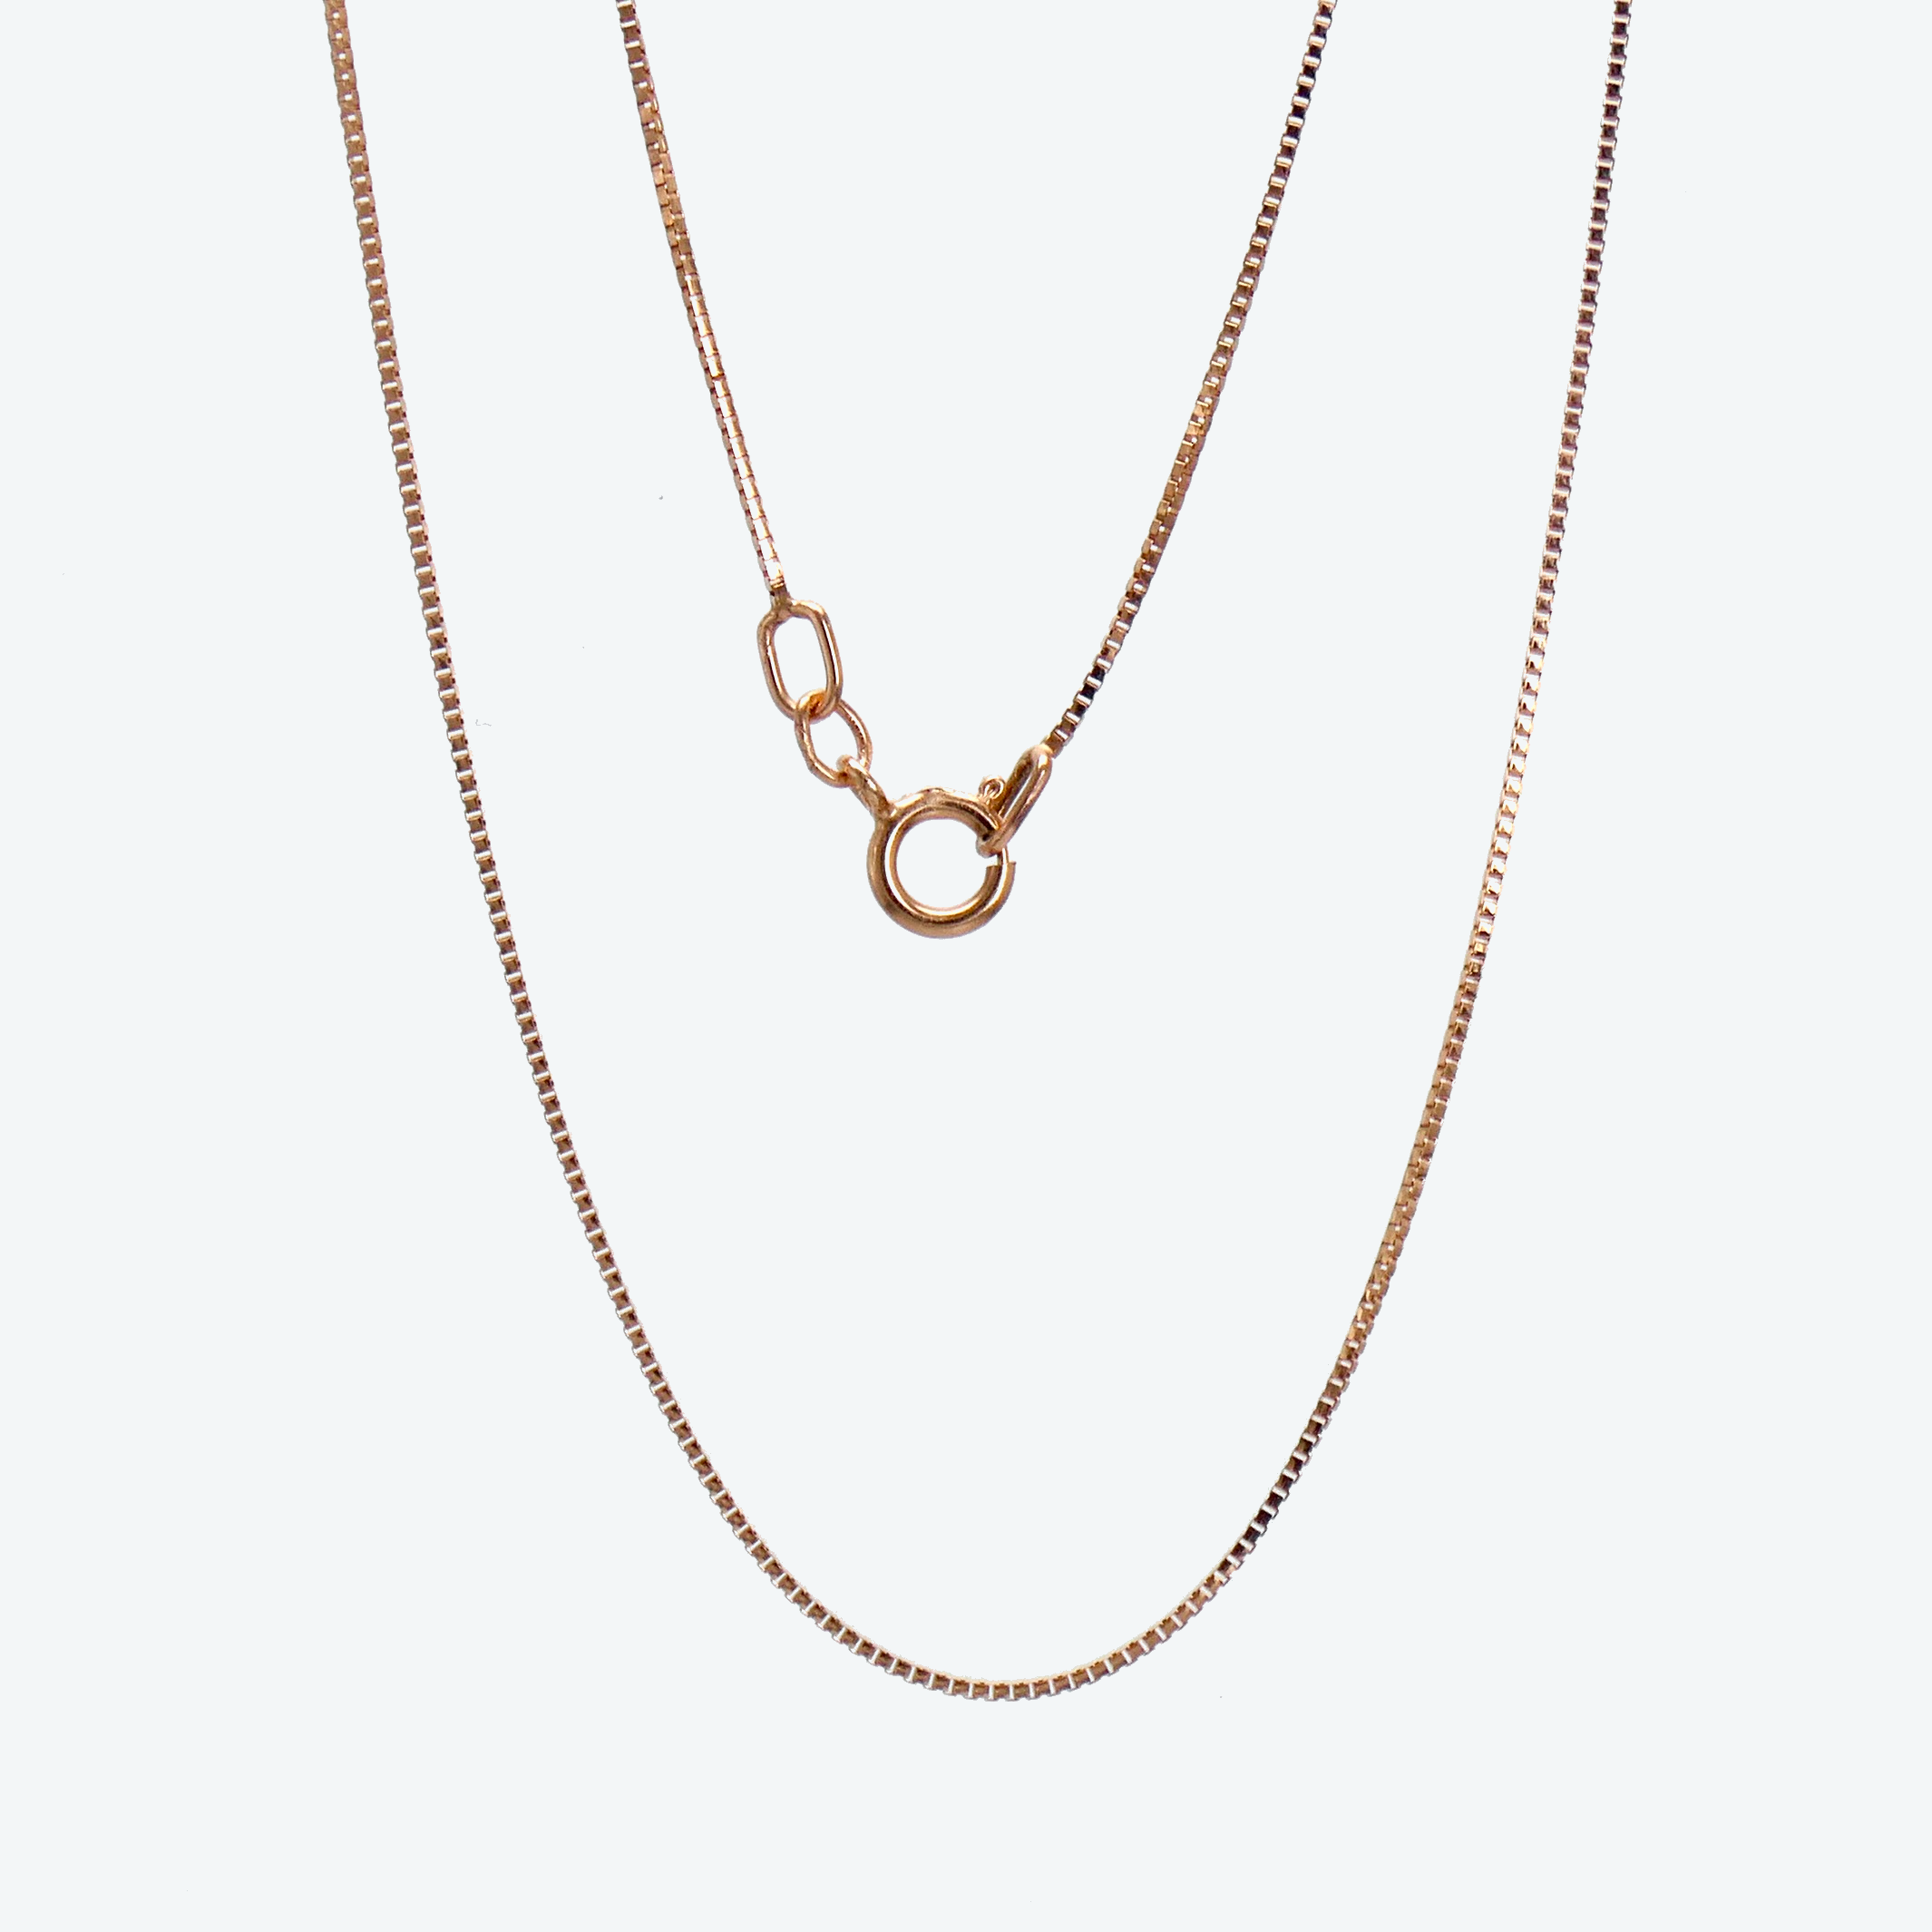 10K Rose Gold 20" Box Link Chain Necklace